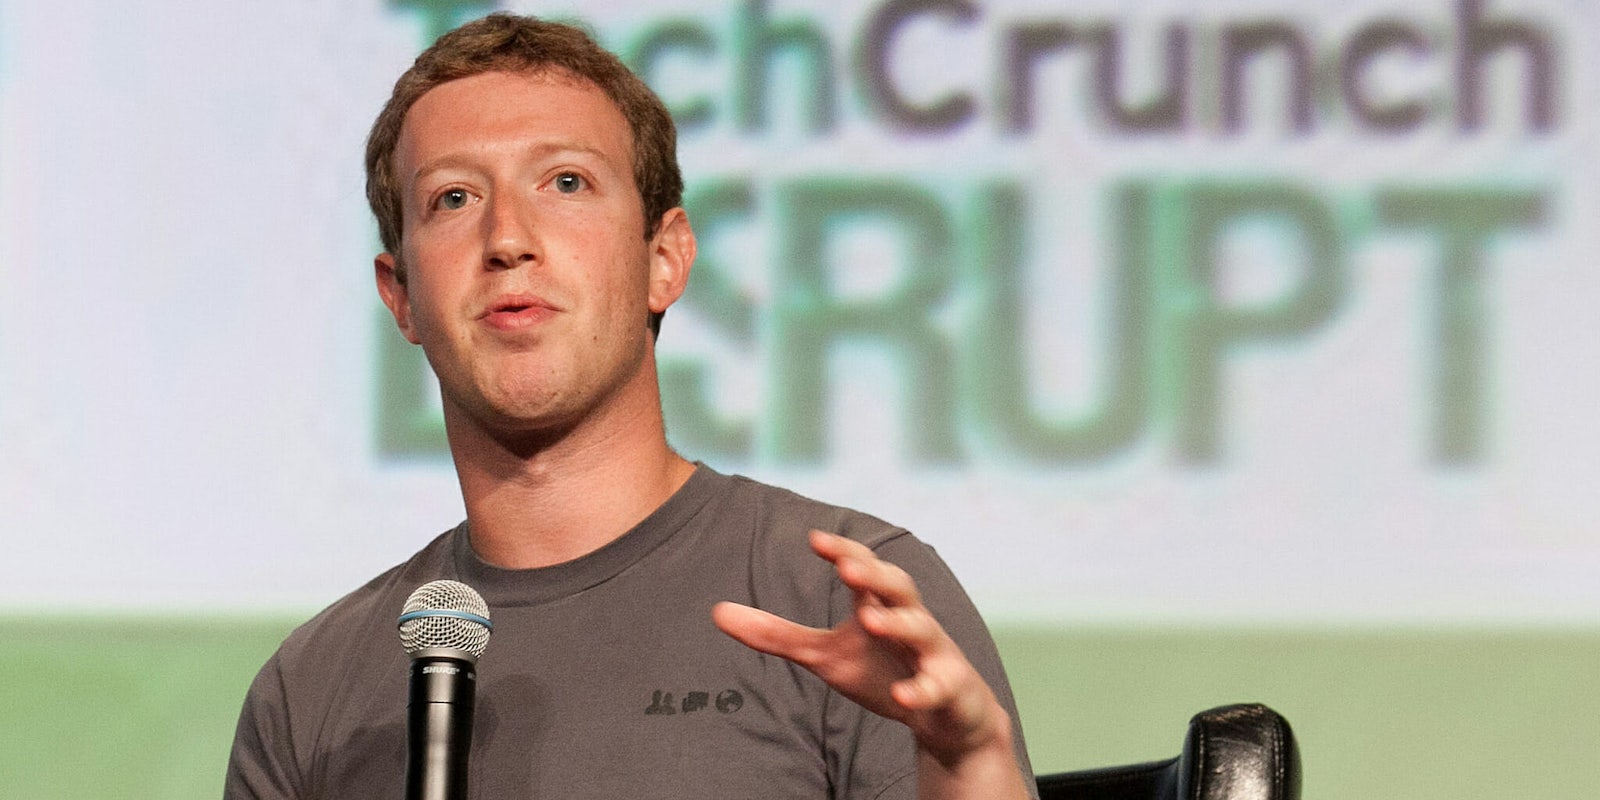 Facebook shareholders release proposal to oust Mark Zuckerberg as chairman.